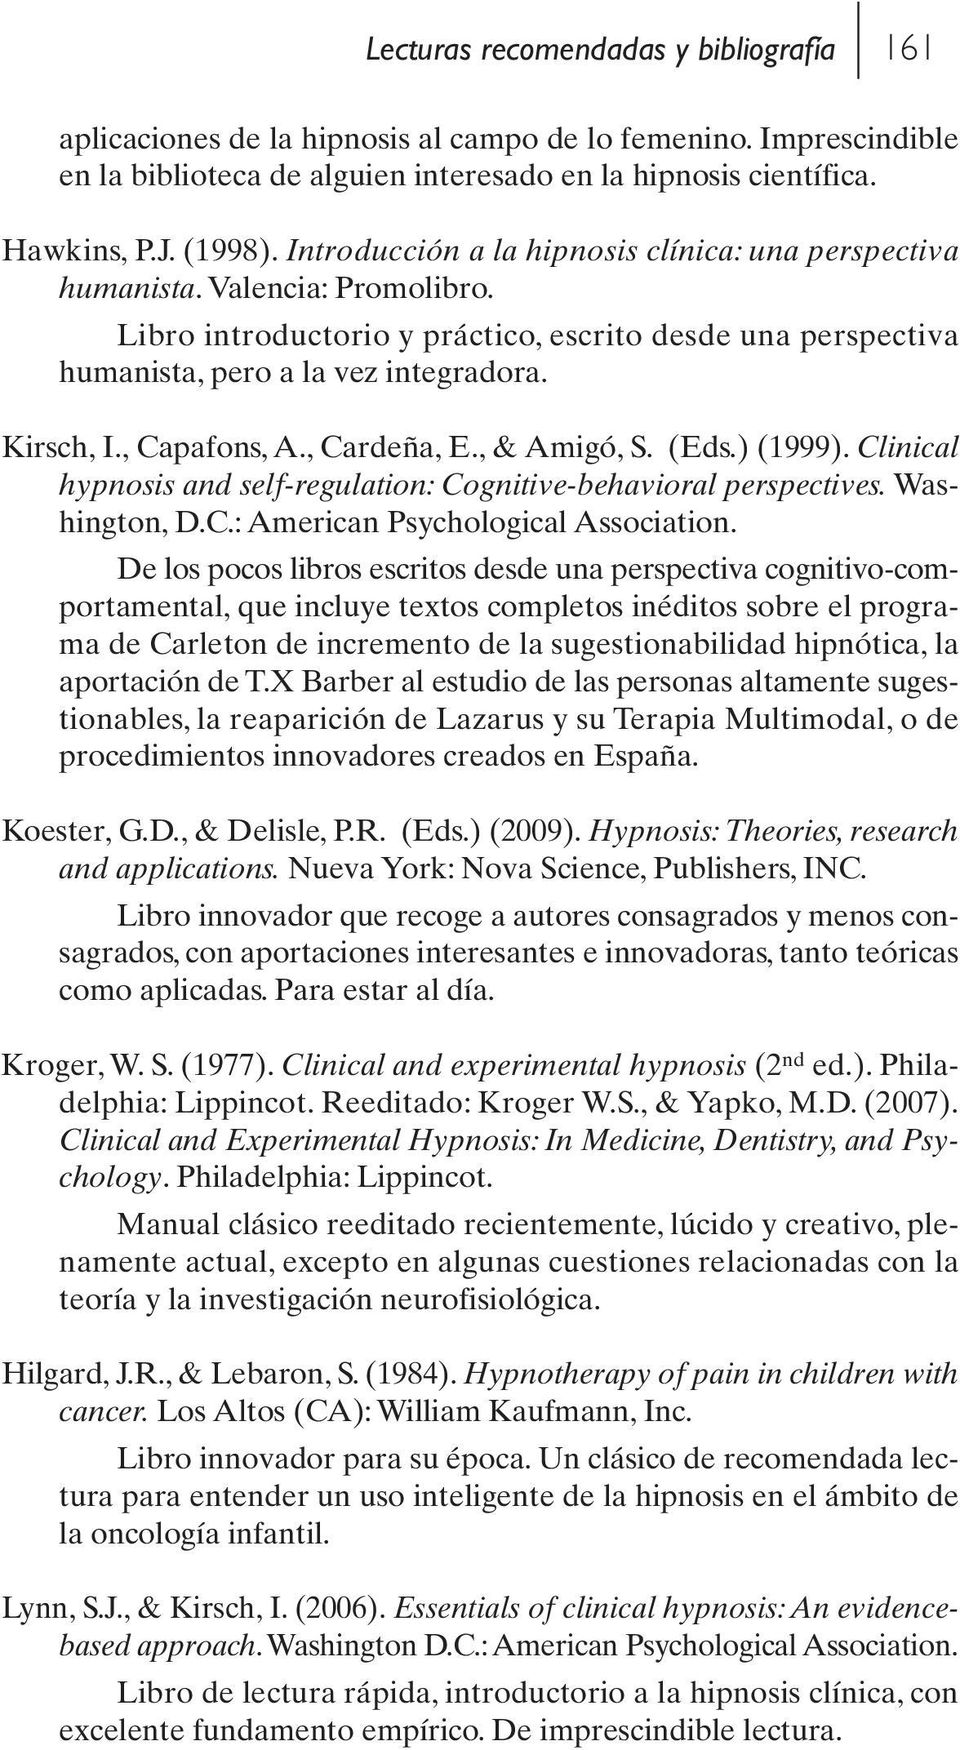 , Capafons, A., Cardeña, E., & Amigó, S. (Eds.) (1999). Clinical hypnosis and self-regulation: Cognitive-behavioral perspectives. Washington, D.C.: American Psychological Association.